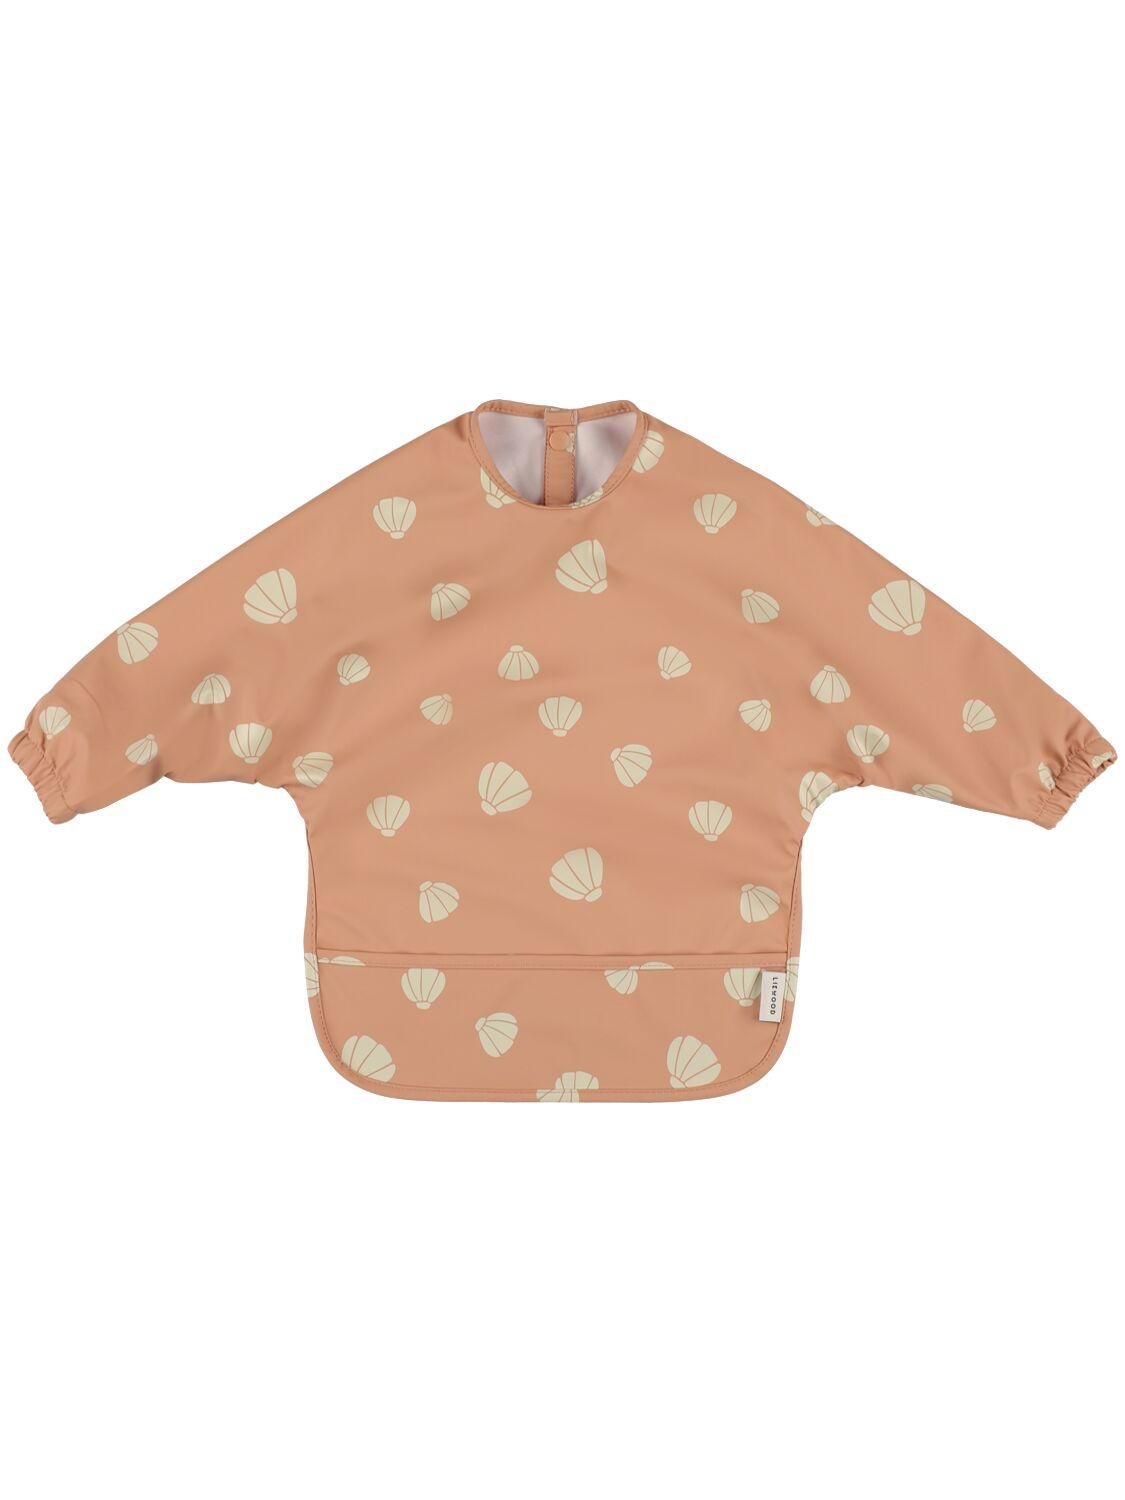 Shell Print Water Repellent Cape Bib by LIEWOOD